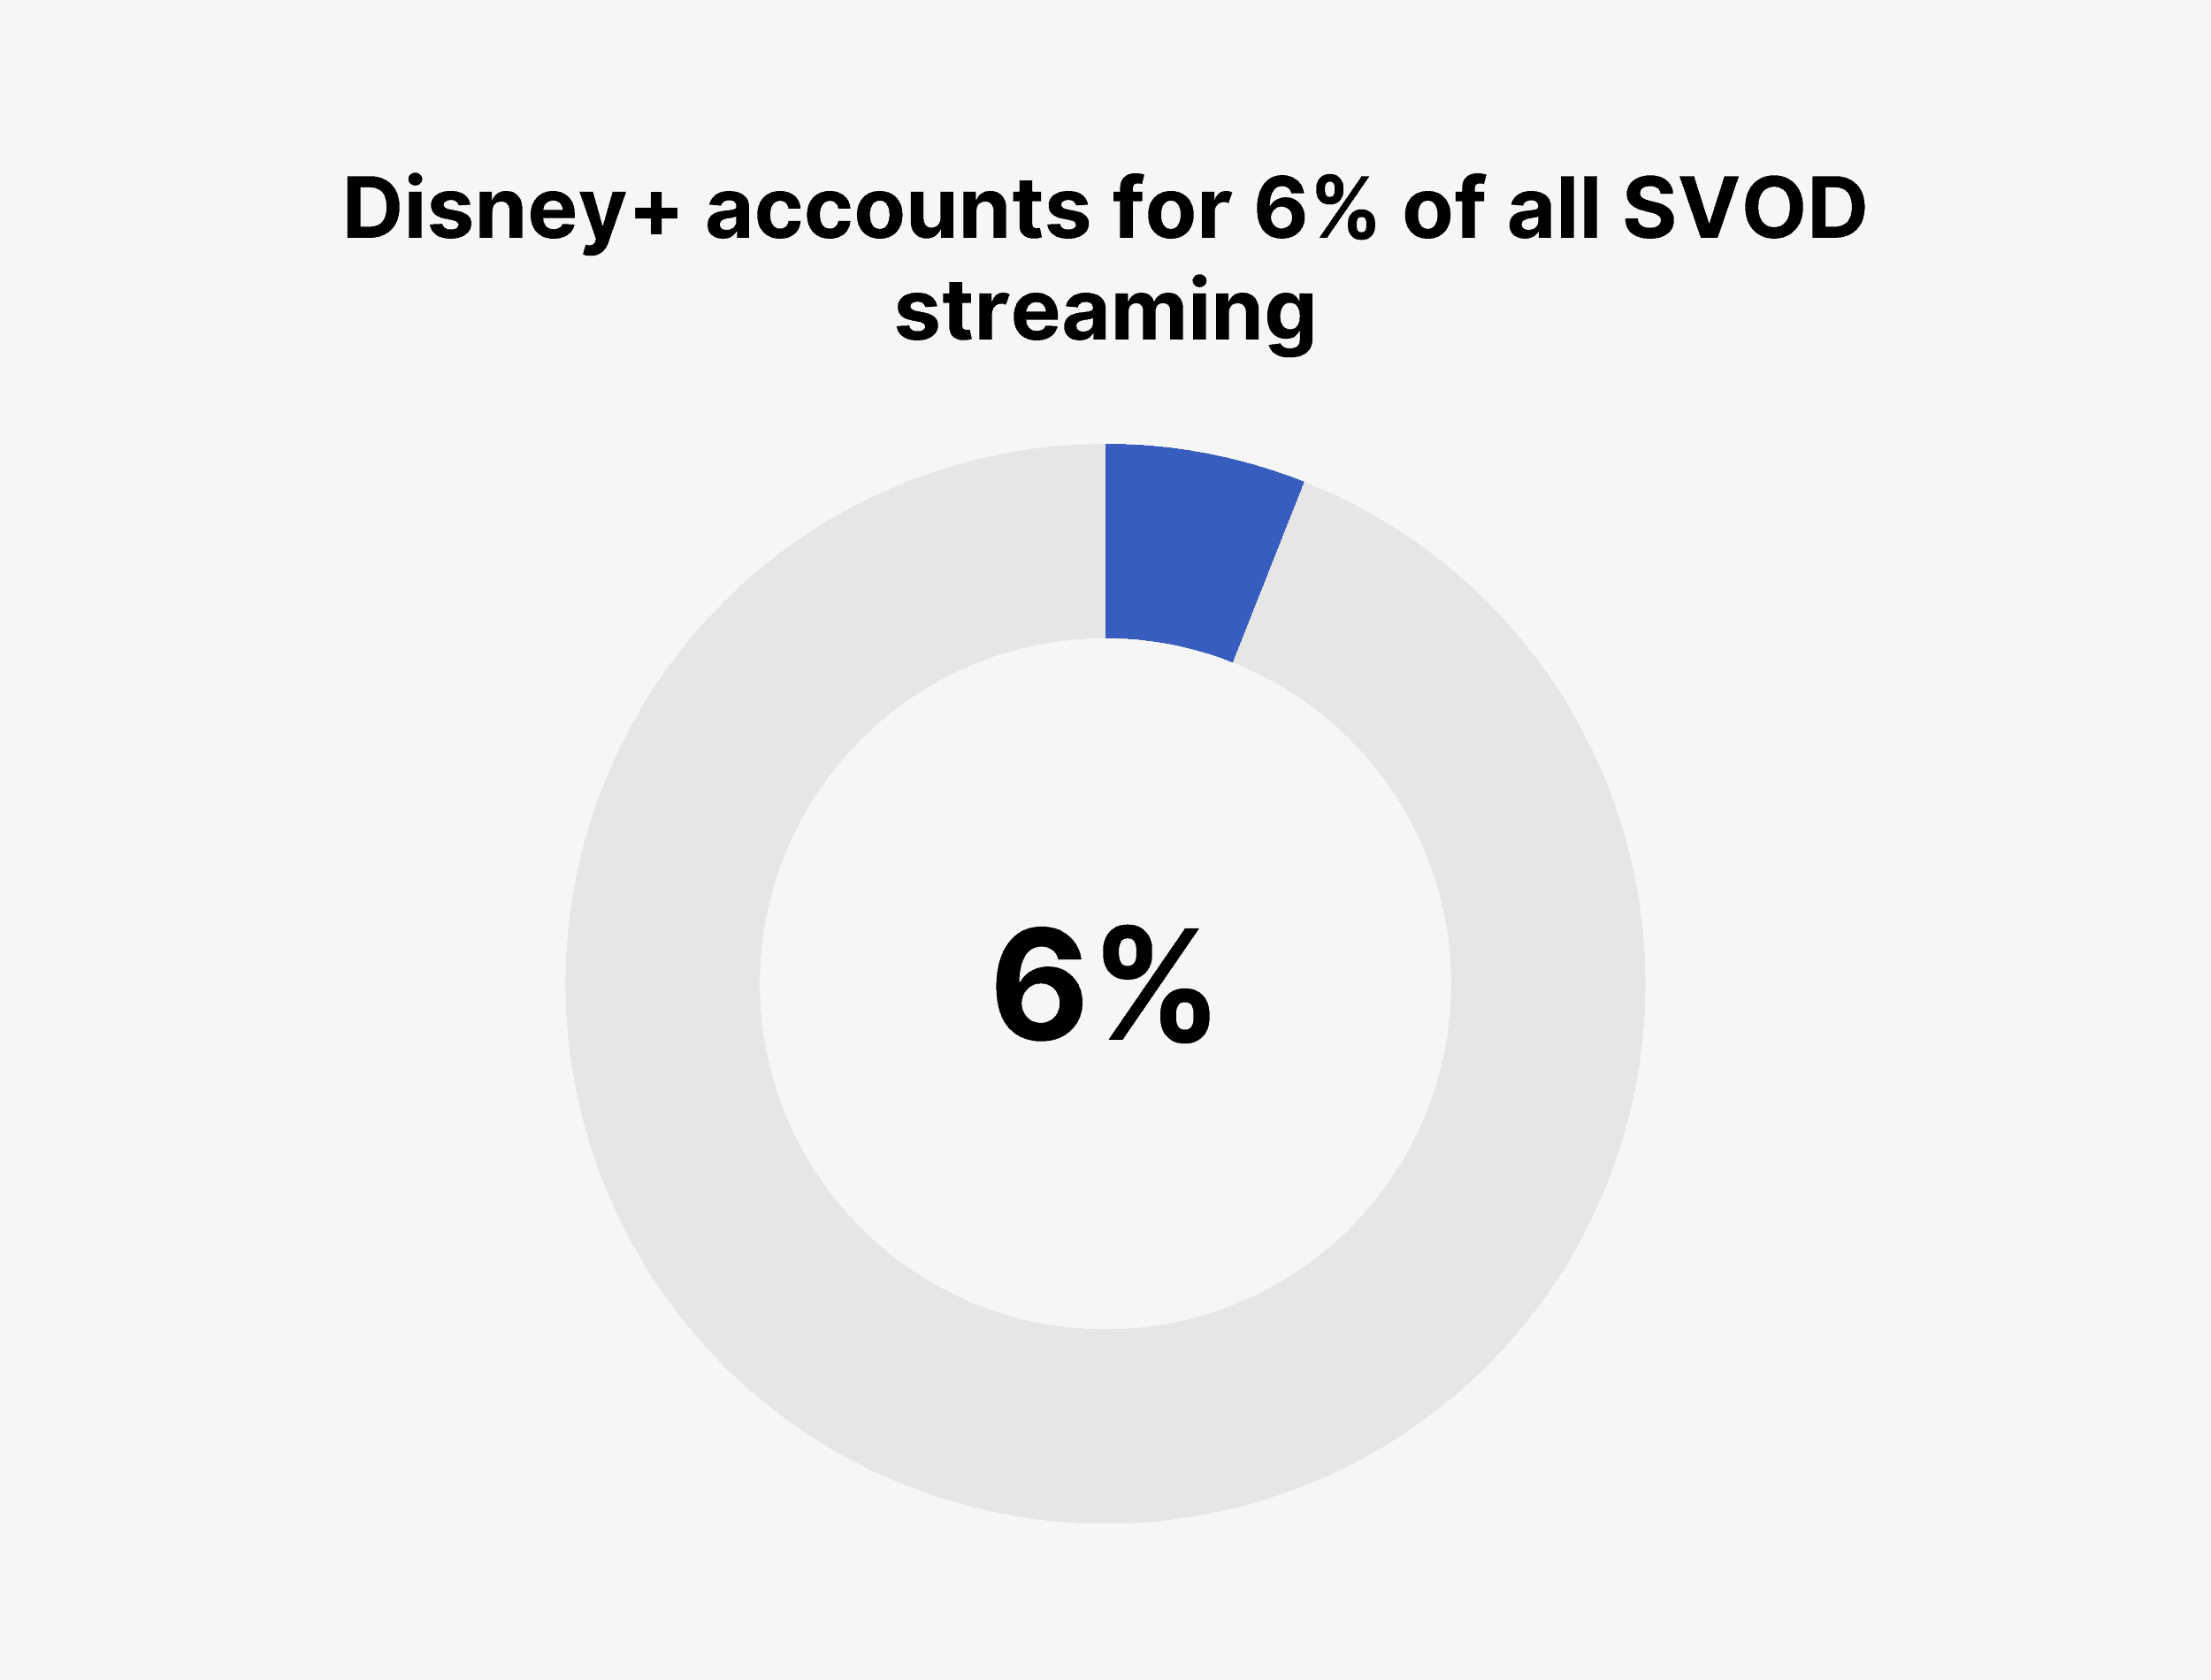 Disney+ accounts for 6% of all SVOD streaming